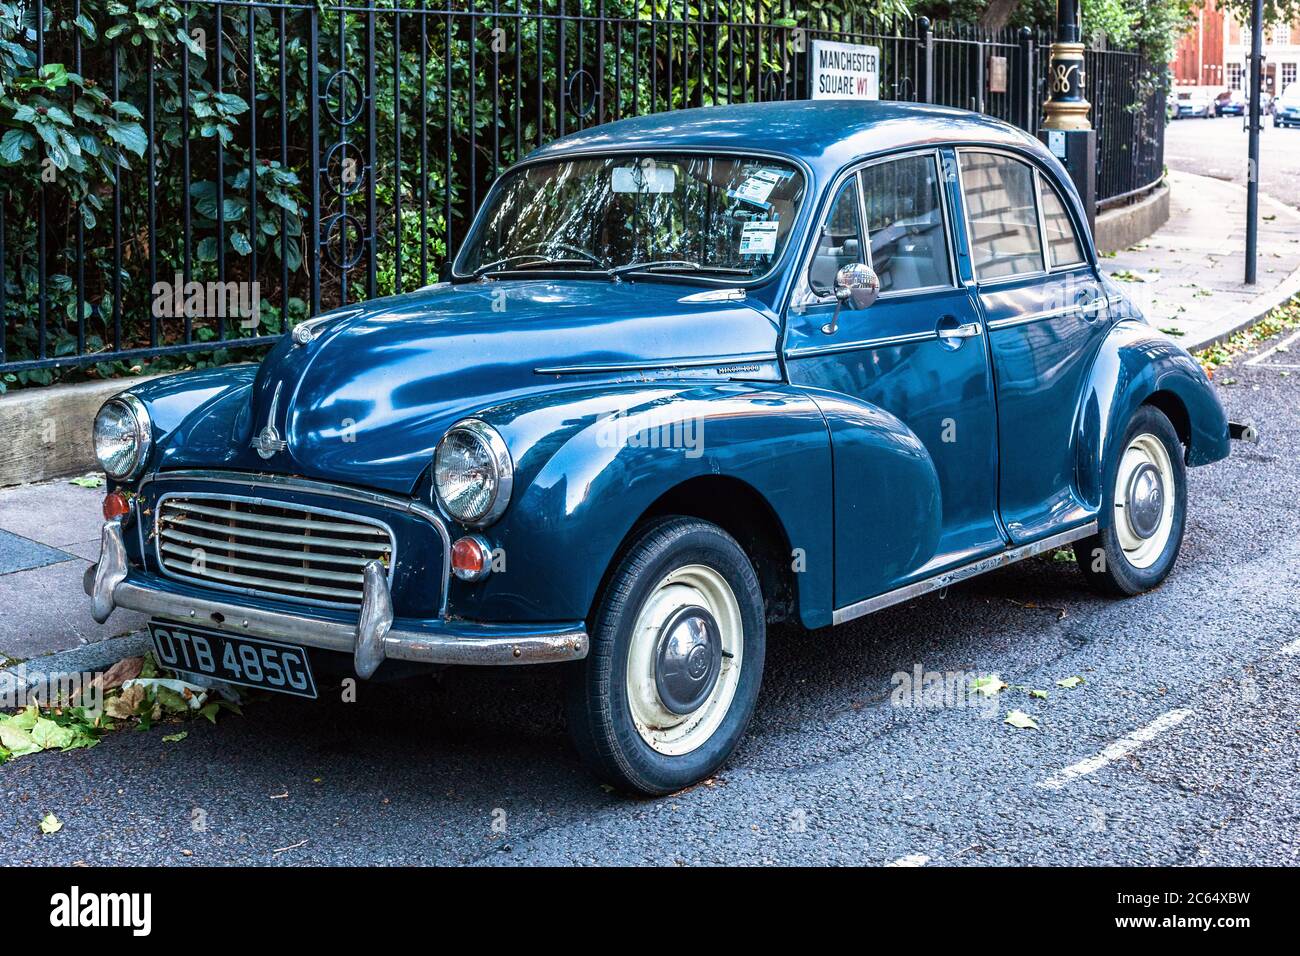 Three quarter front view of a blue Morris Minor 1000 car, parked on one side of a road, London, England, UK. Stock Photo